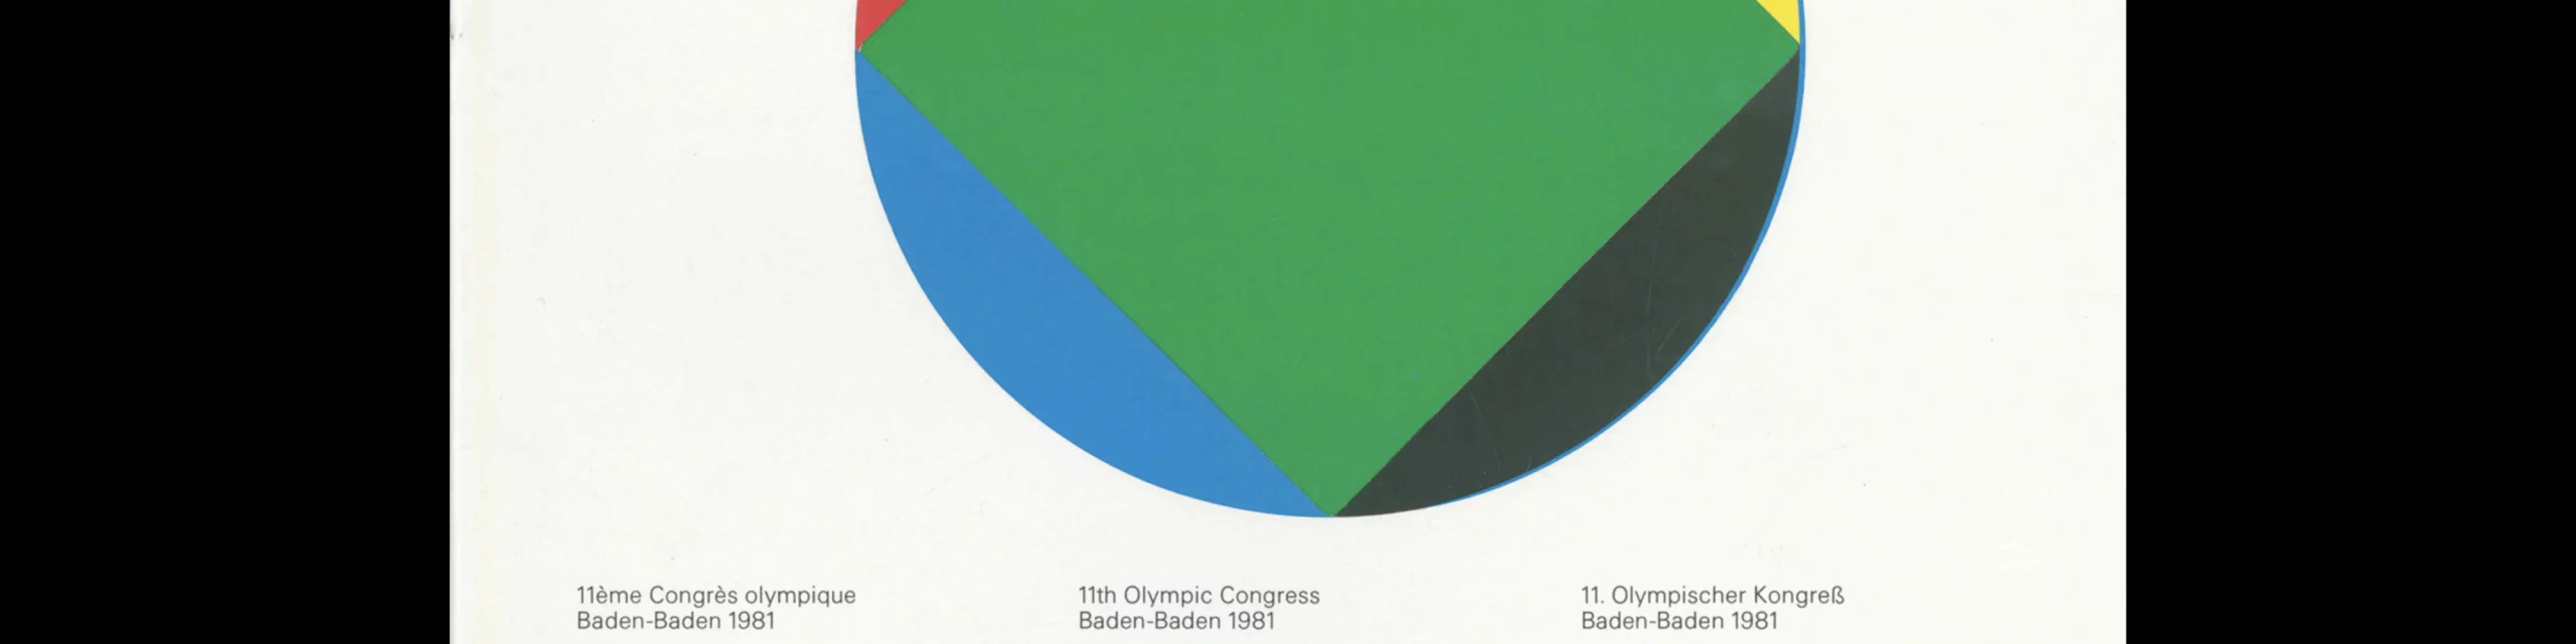 11th Olympic Congress, Brochure, 1981. Design by Anton Stankowski, Otl Aicher, Rolf Müller and Partners